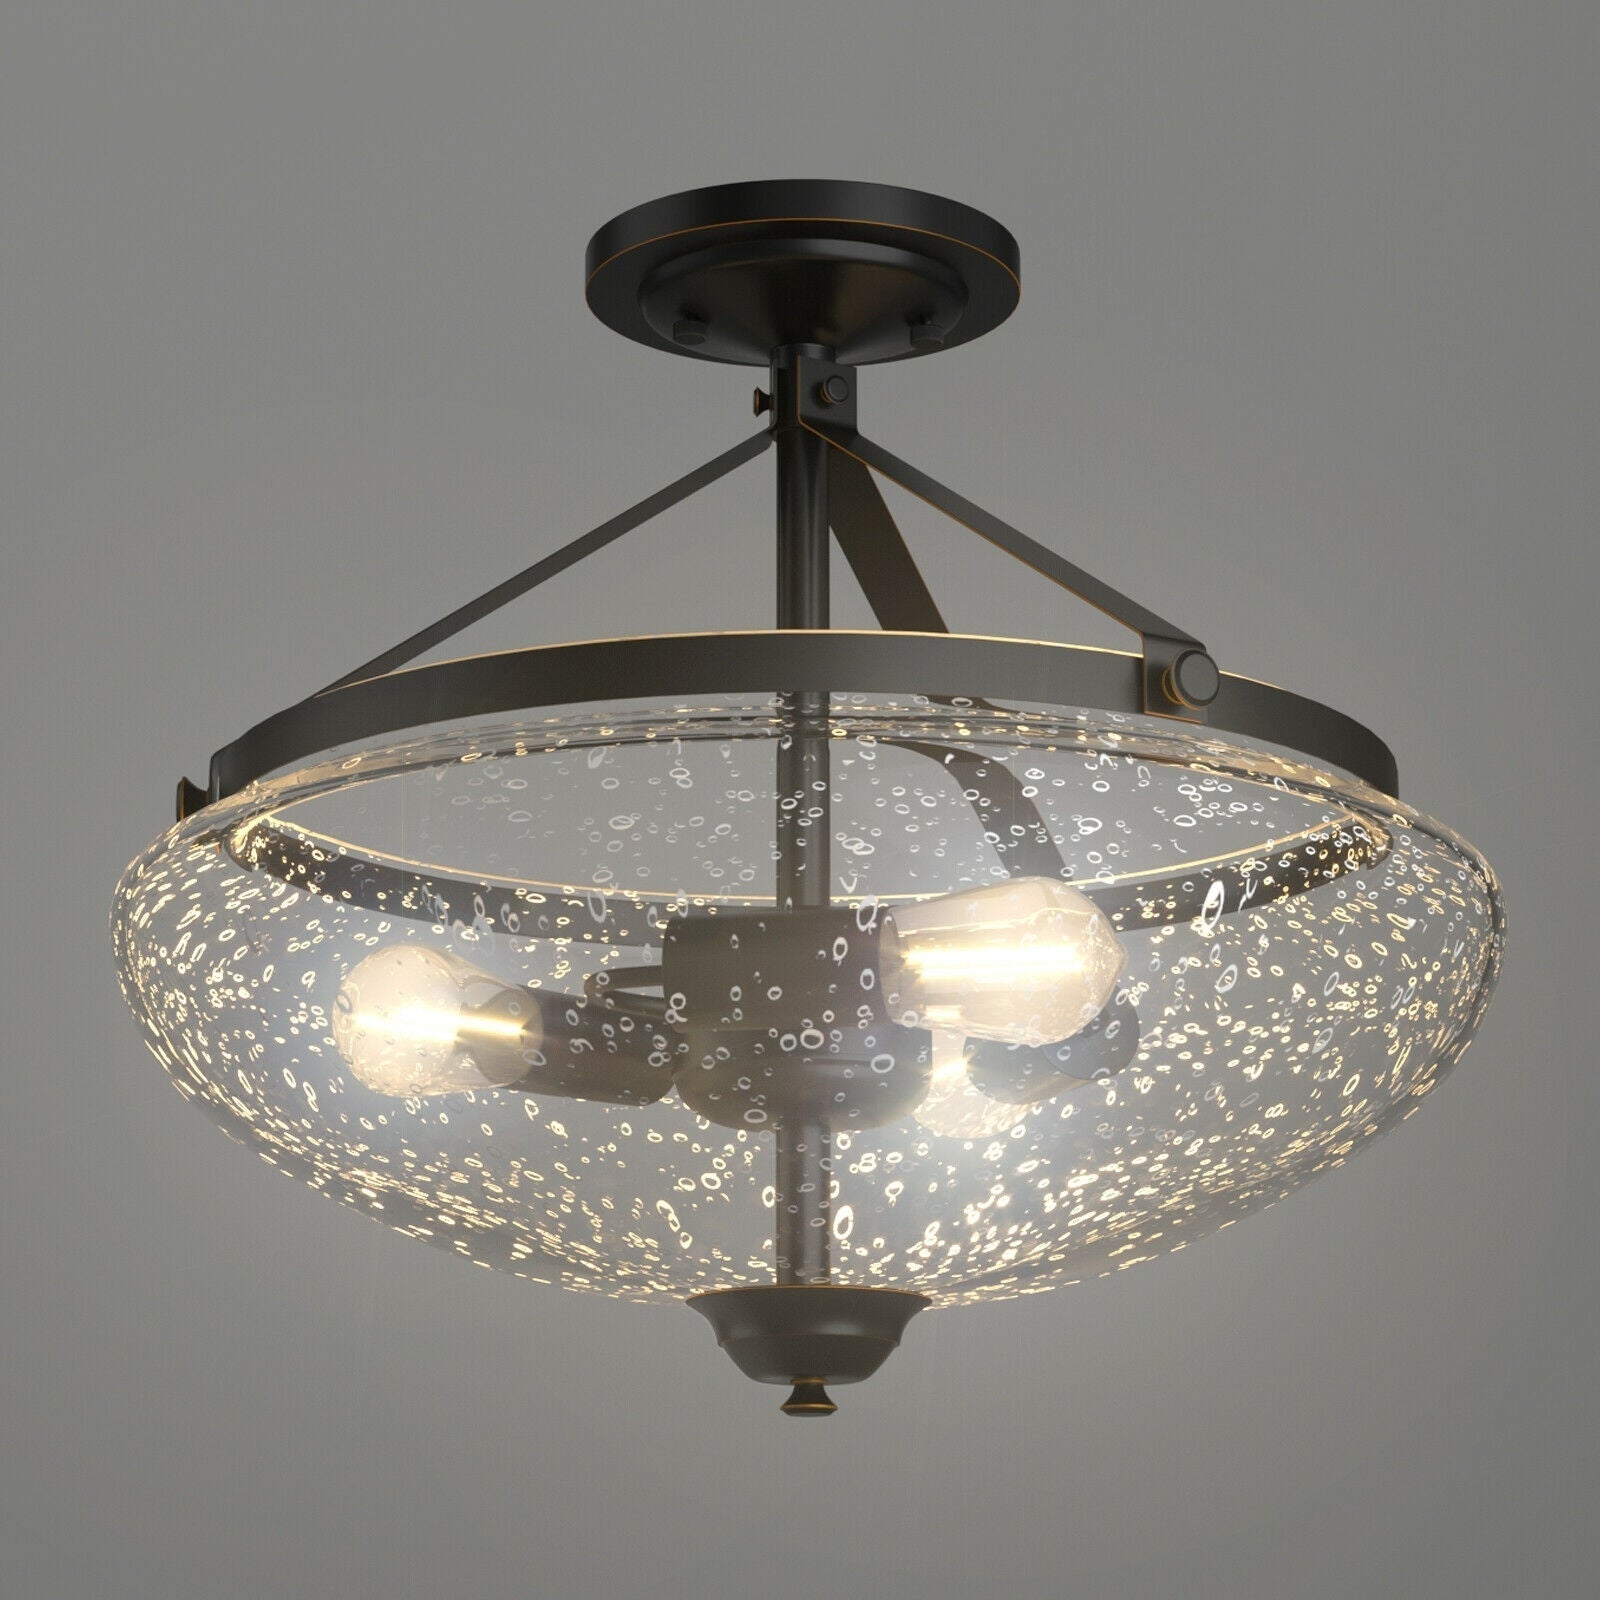 3-Light Semi Flush Industrial Seeded Glass Mount Ceiling Lamp Moorescarts